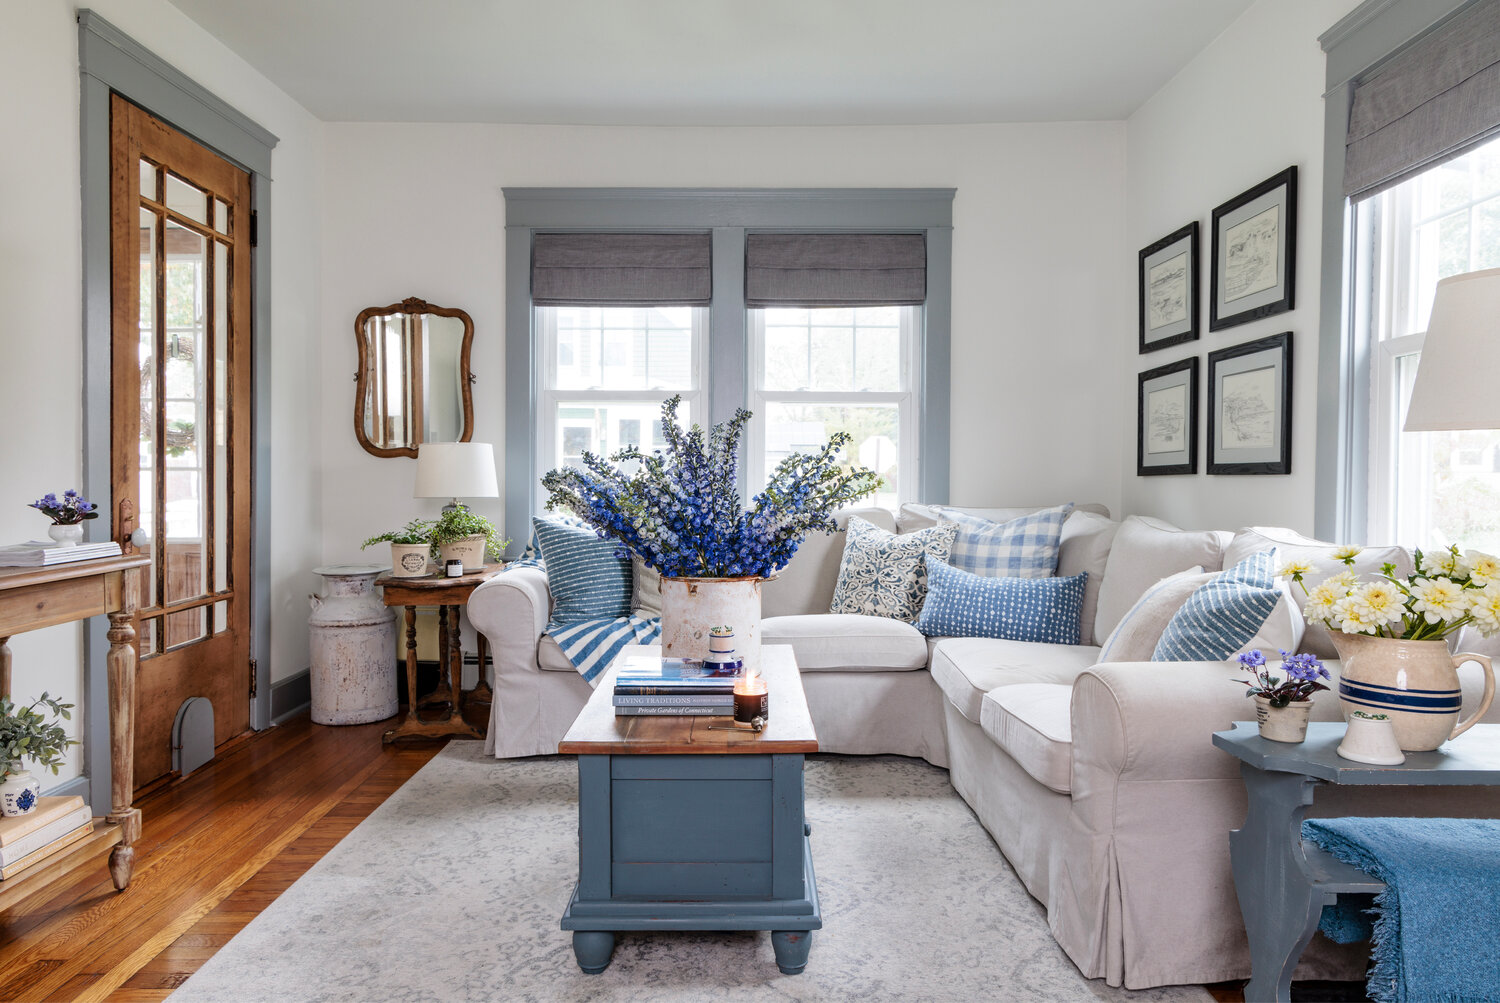 In the cozy living room, blue accents rest against 
a white backdrop. A narrow coffee table and slender credenza/sideboard balance the ample sofa.